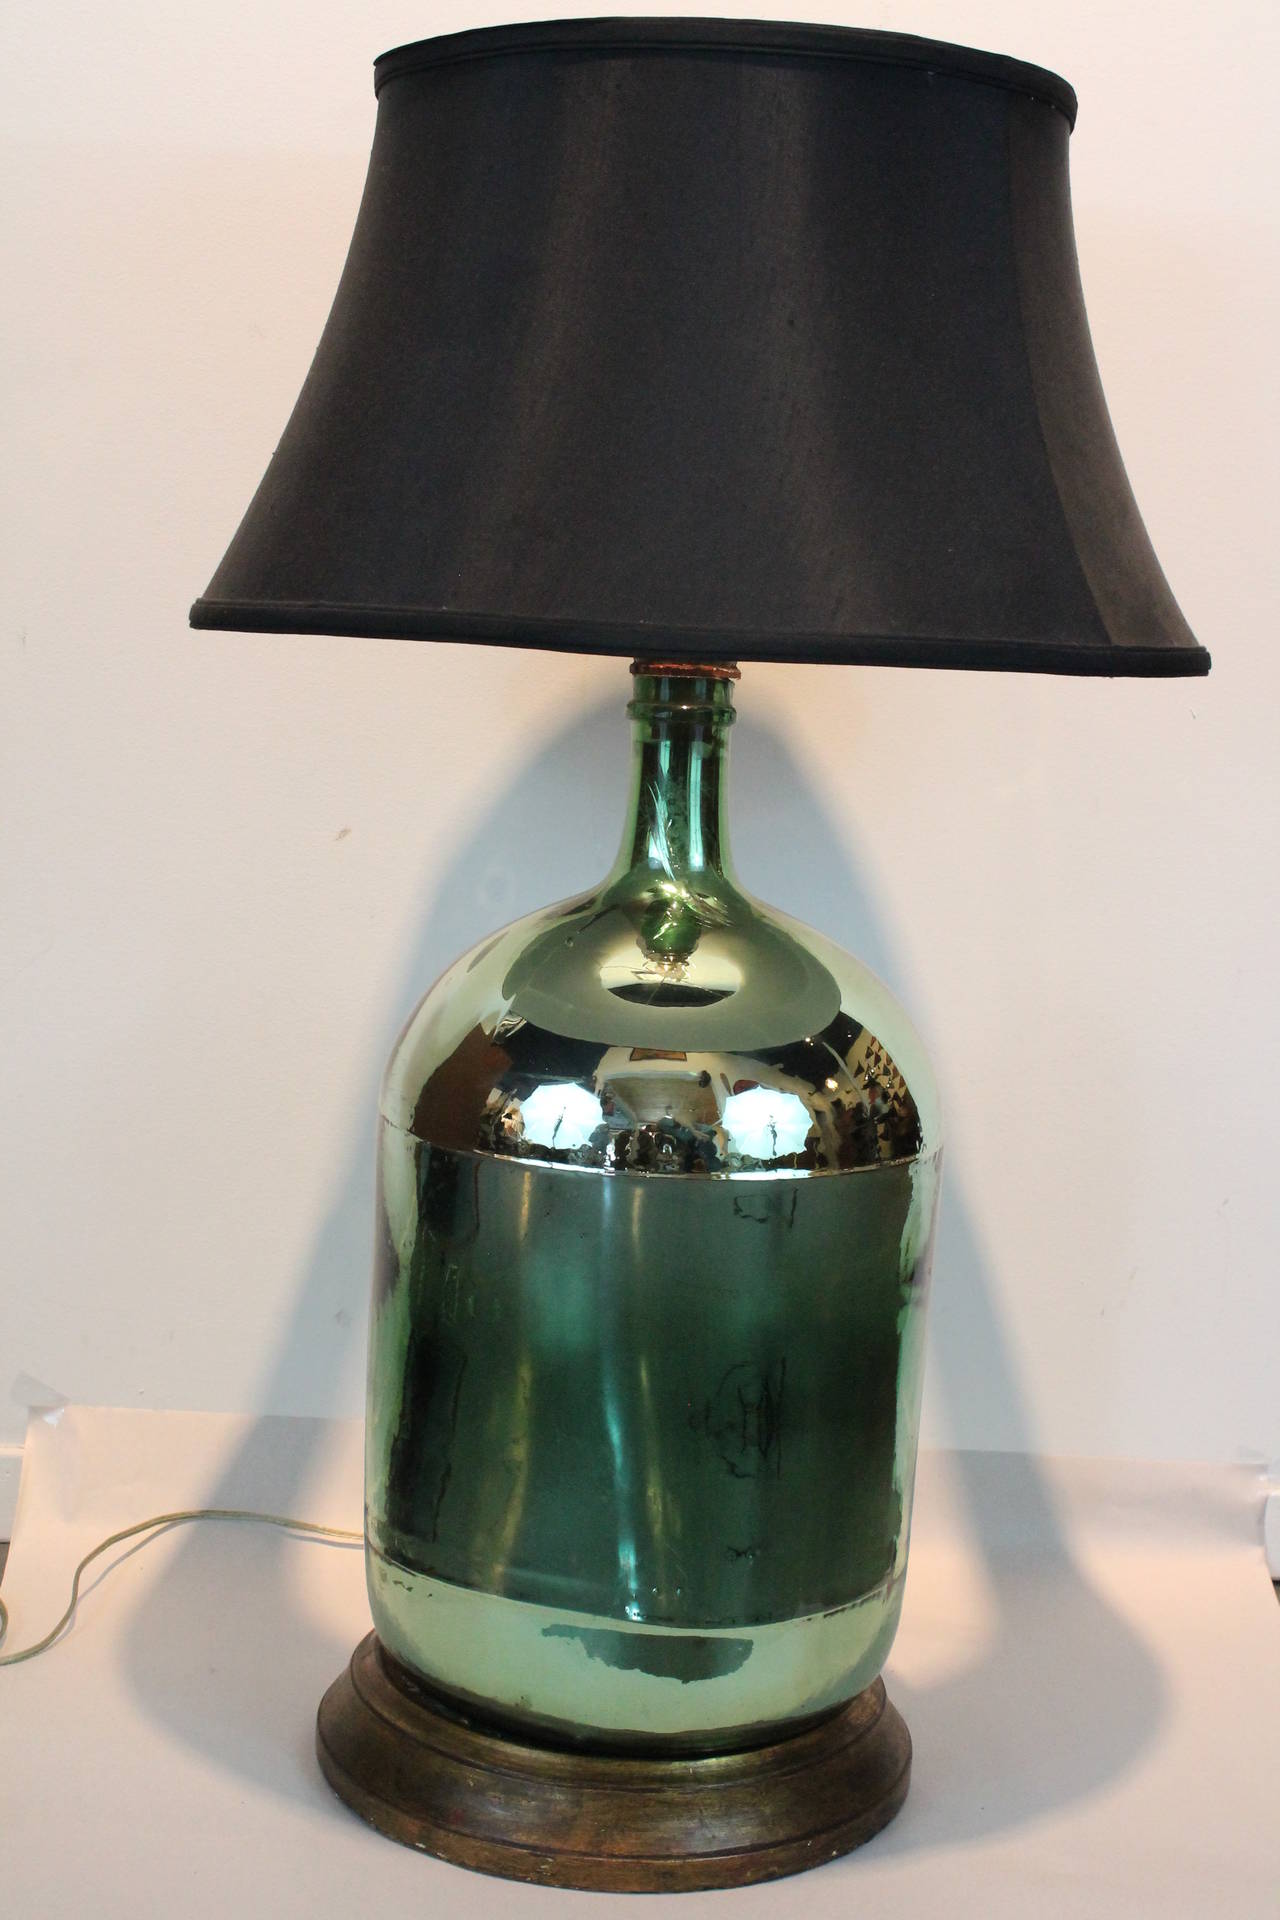 Early 20th century handblown green mercury glass vessel turned into a lamp.
On a turned giltwood base.
Lamp shade not included.